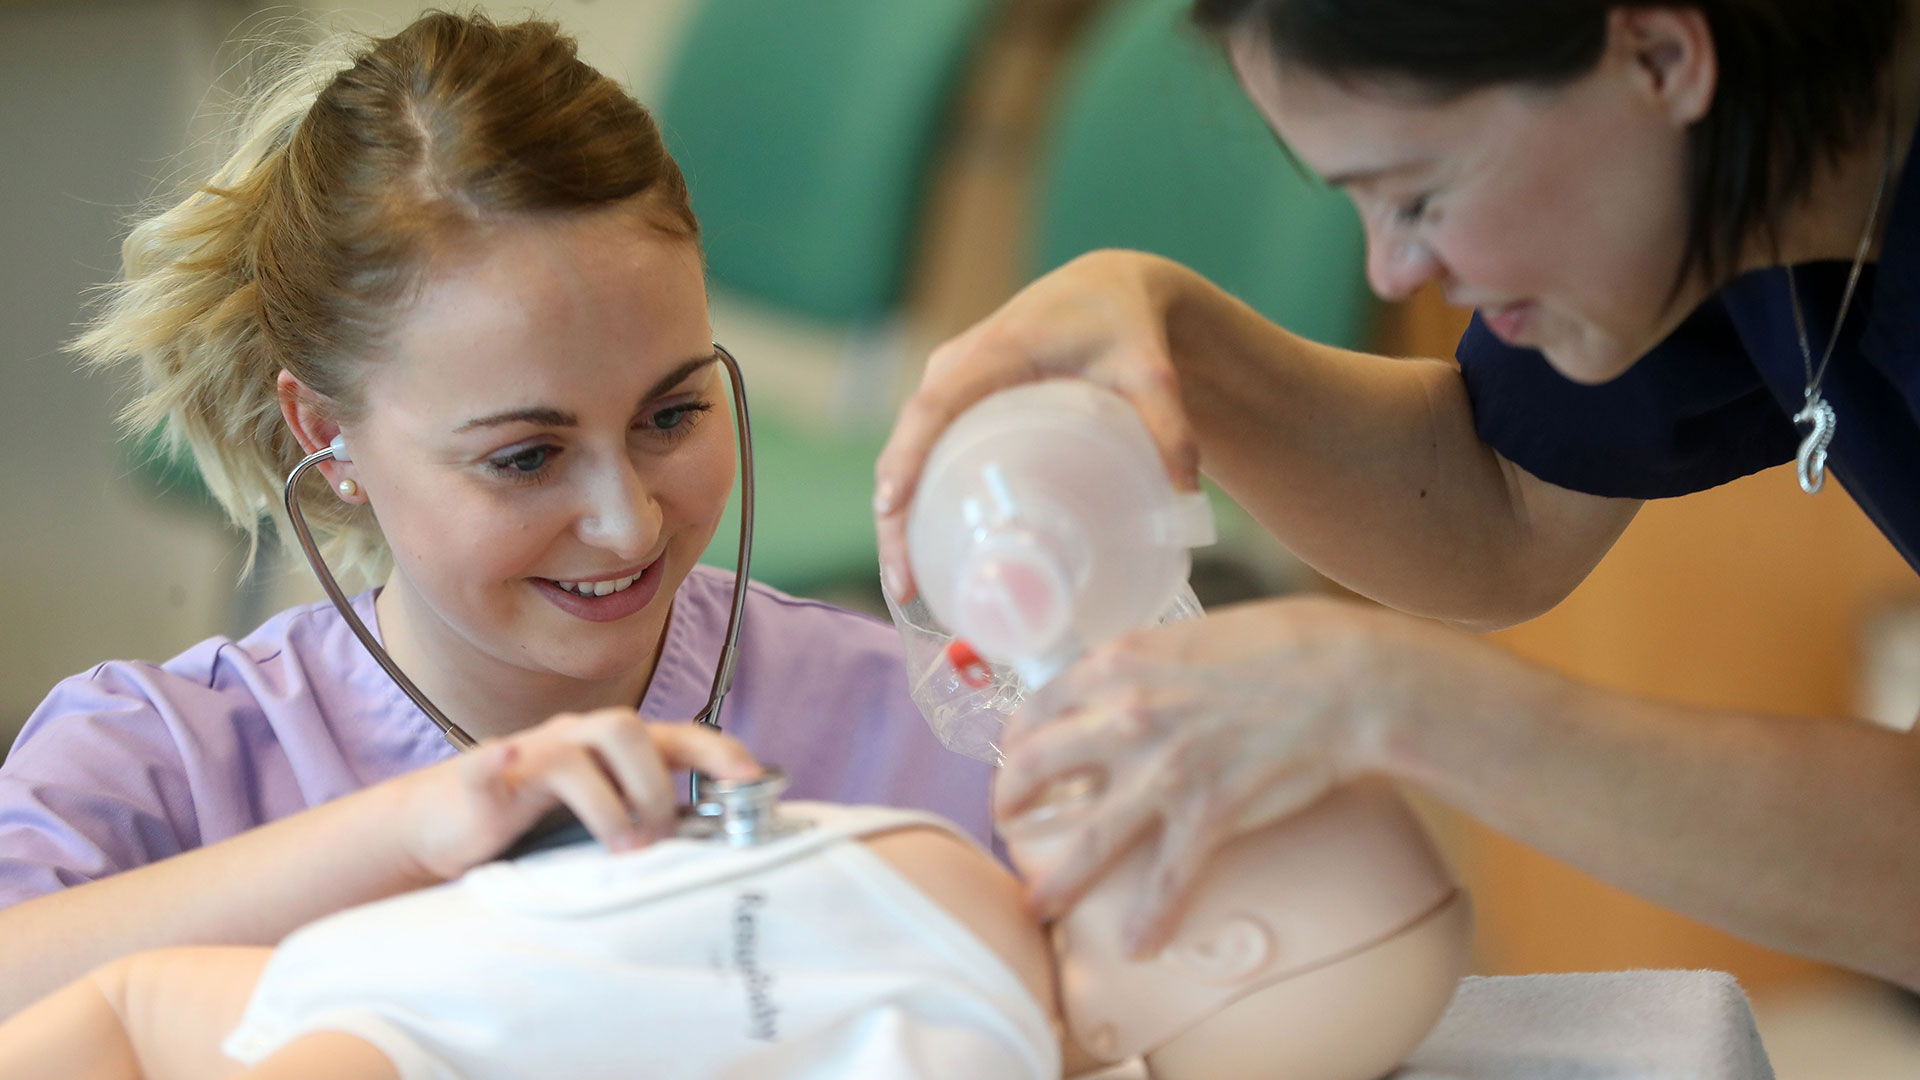 Midwifery-Led Continuity of Care Is Wherever One or Additional Midwives